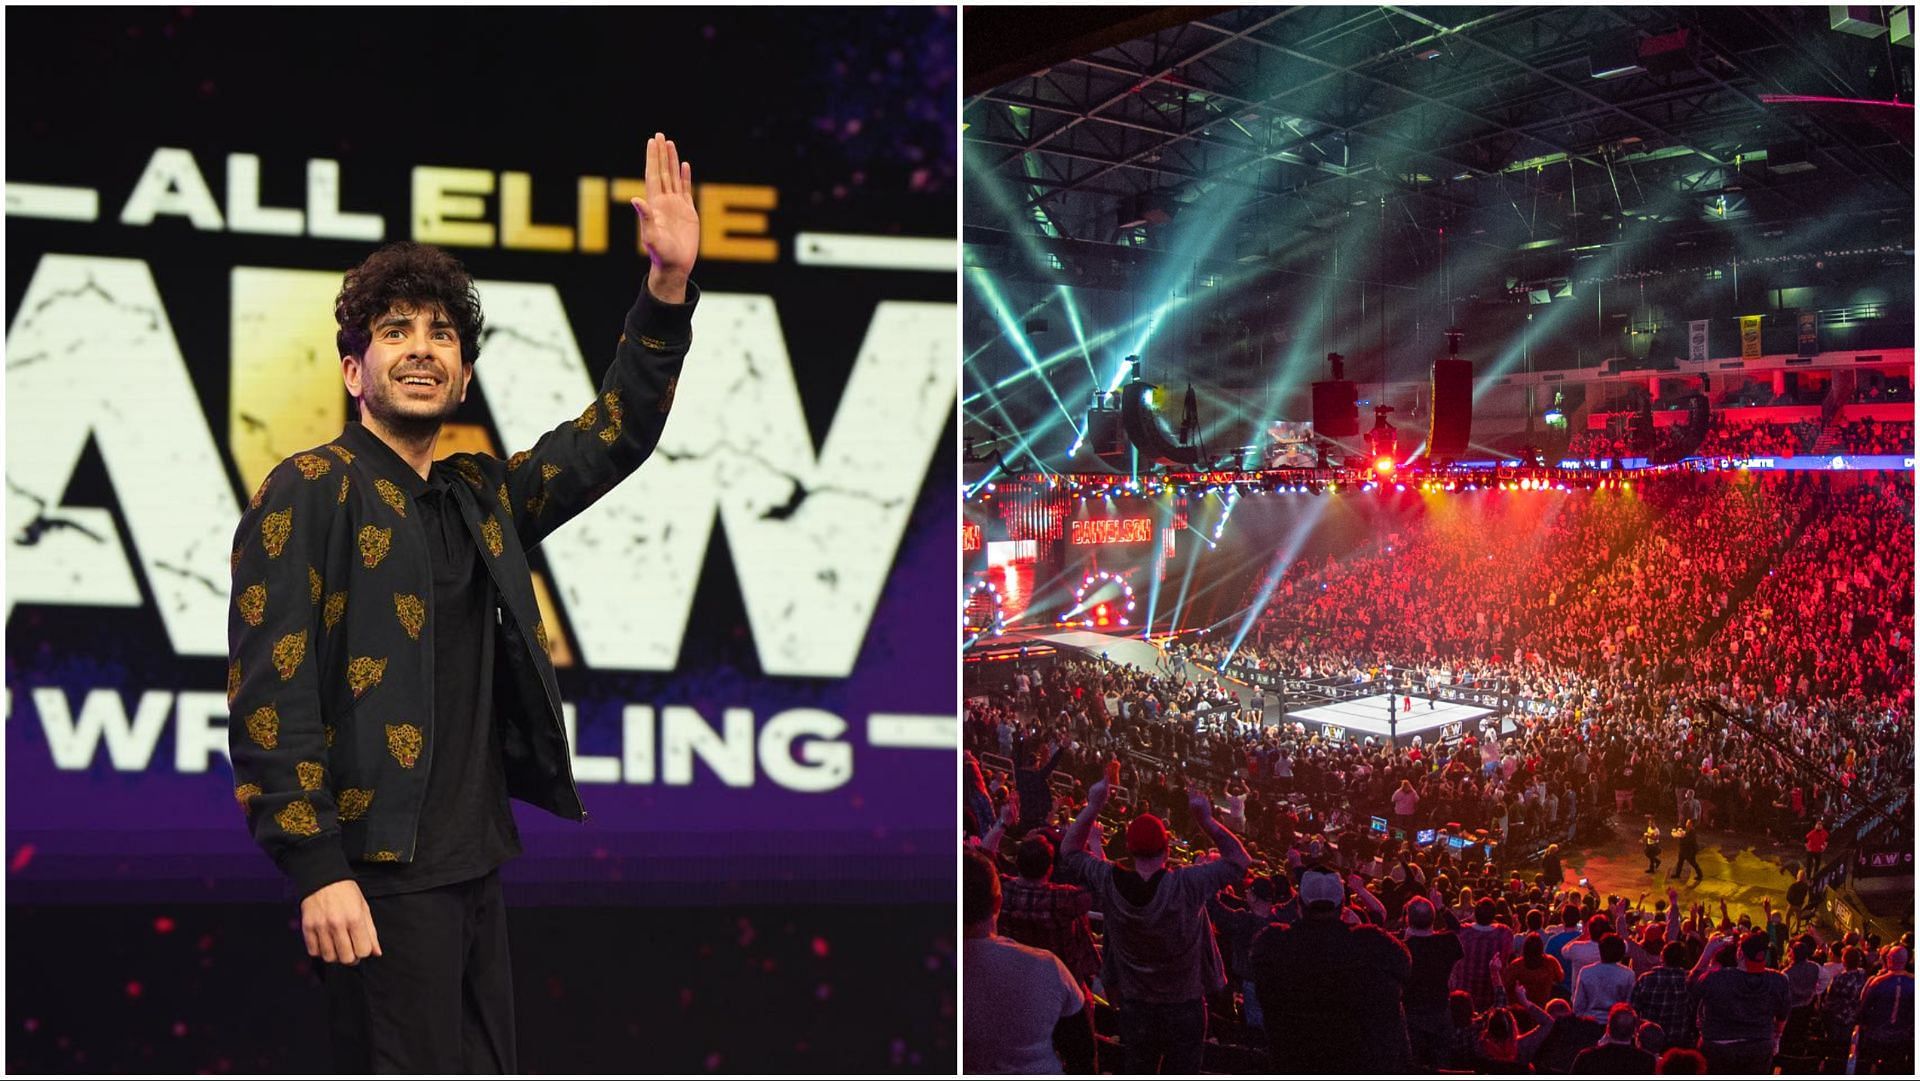 Tony Khan in front of the AEW logo, AEW fans pack local arena for Dynamite